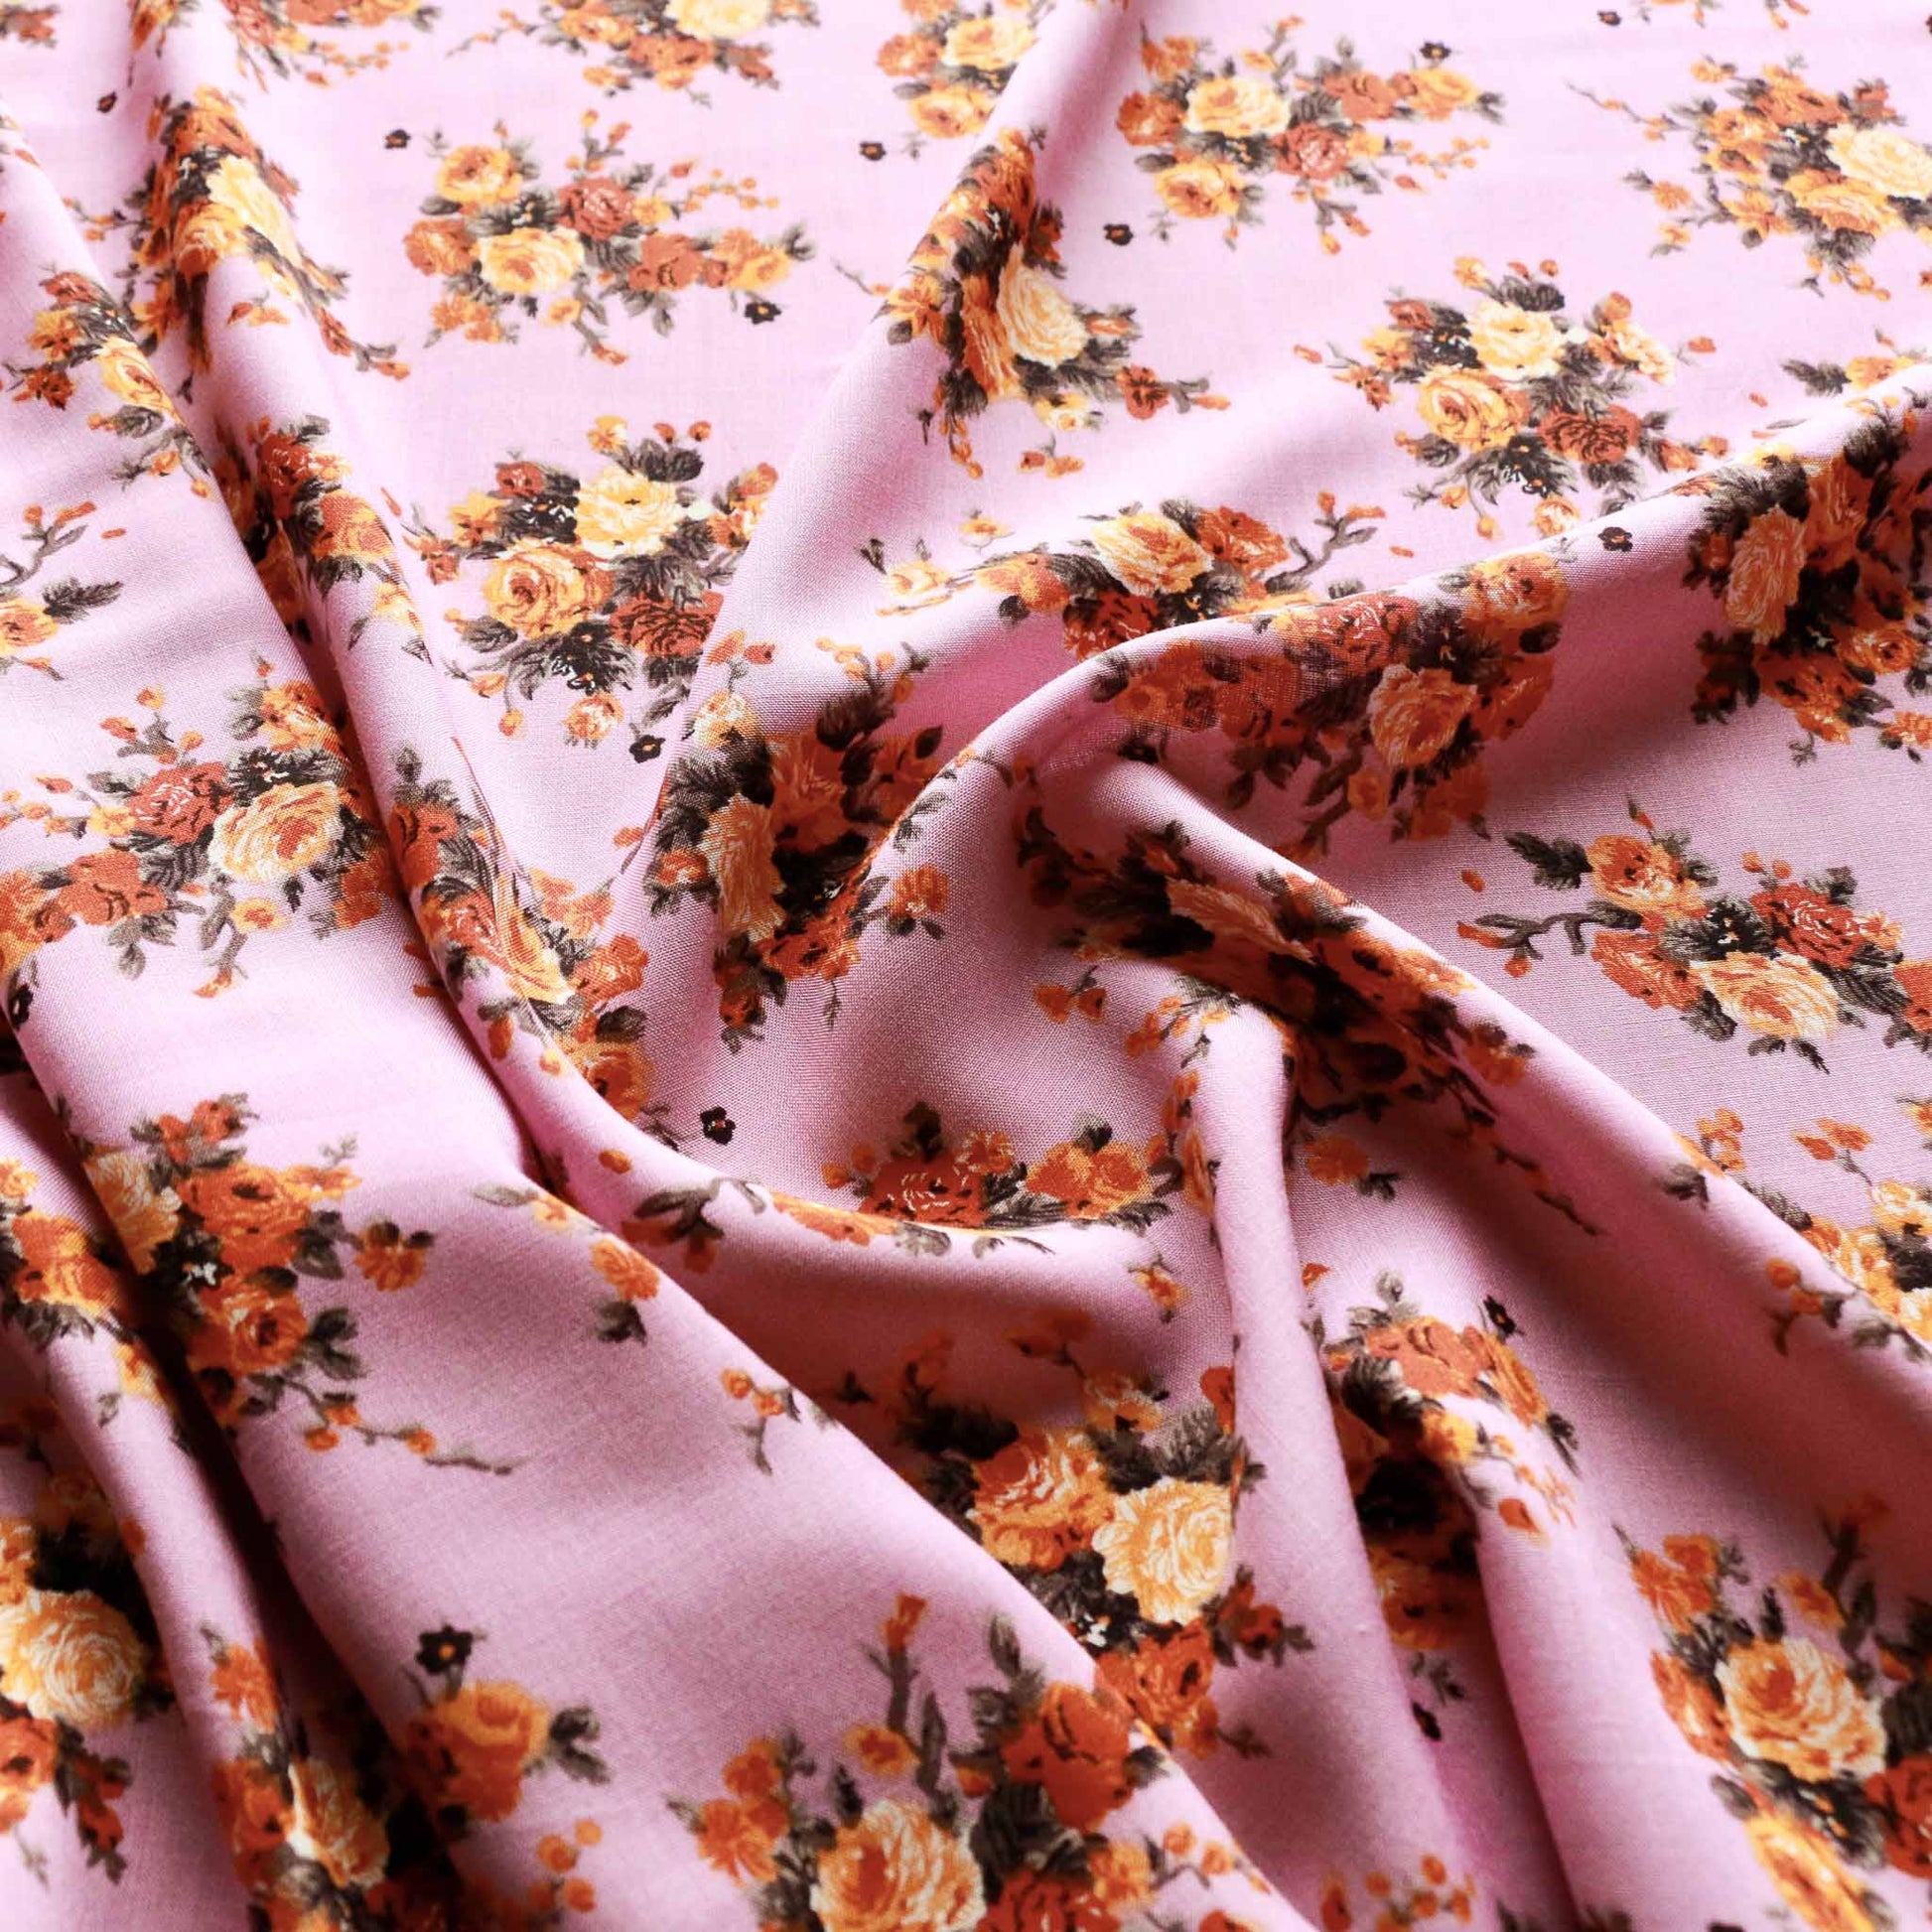 viscose challis dressmaking rayon fabric in lilac with floral printed flowers in orange and yellow